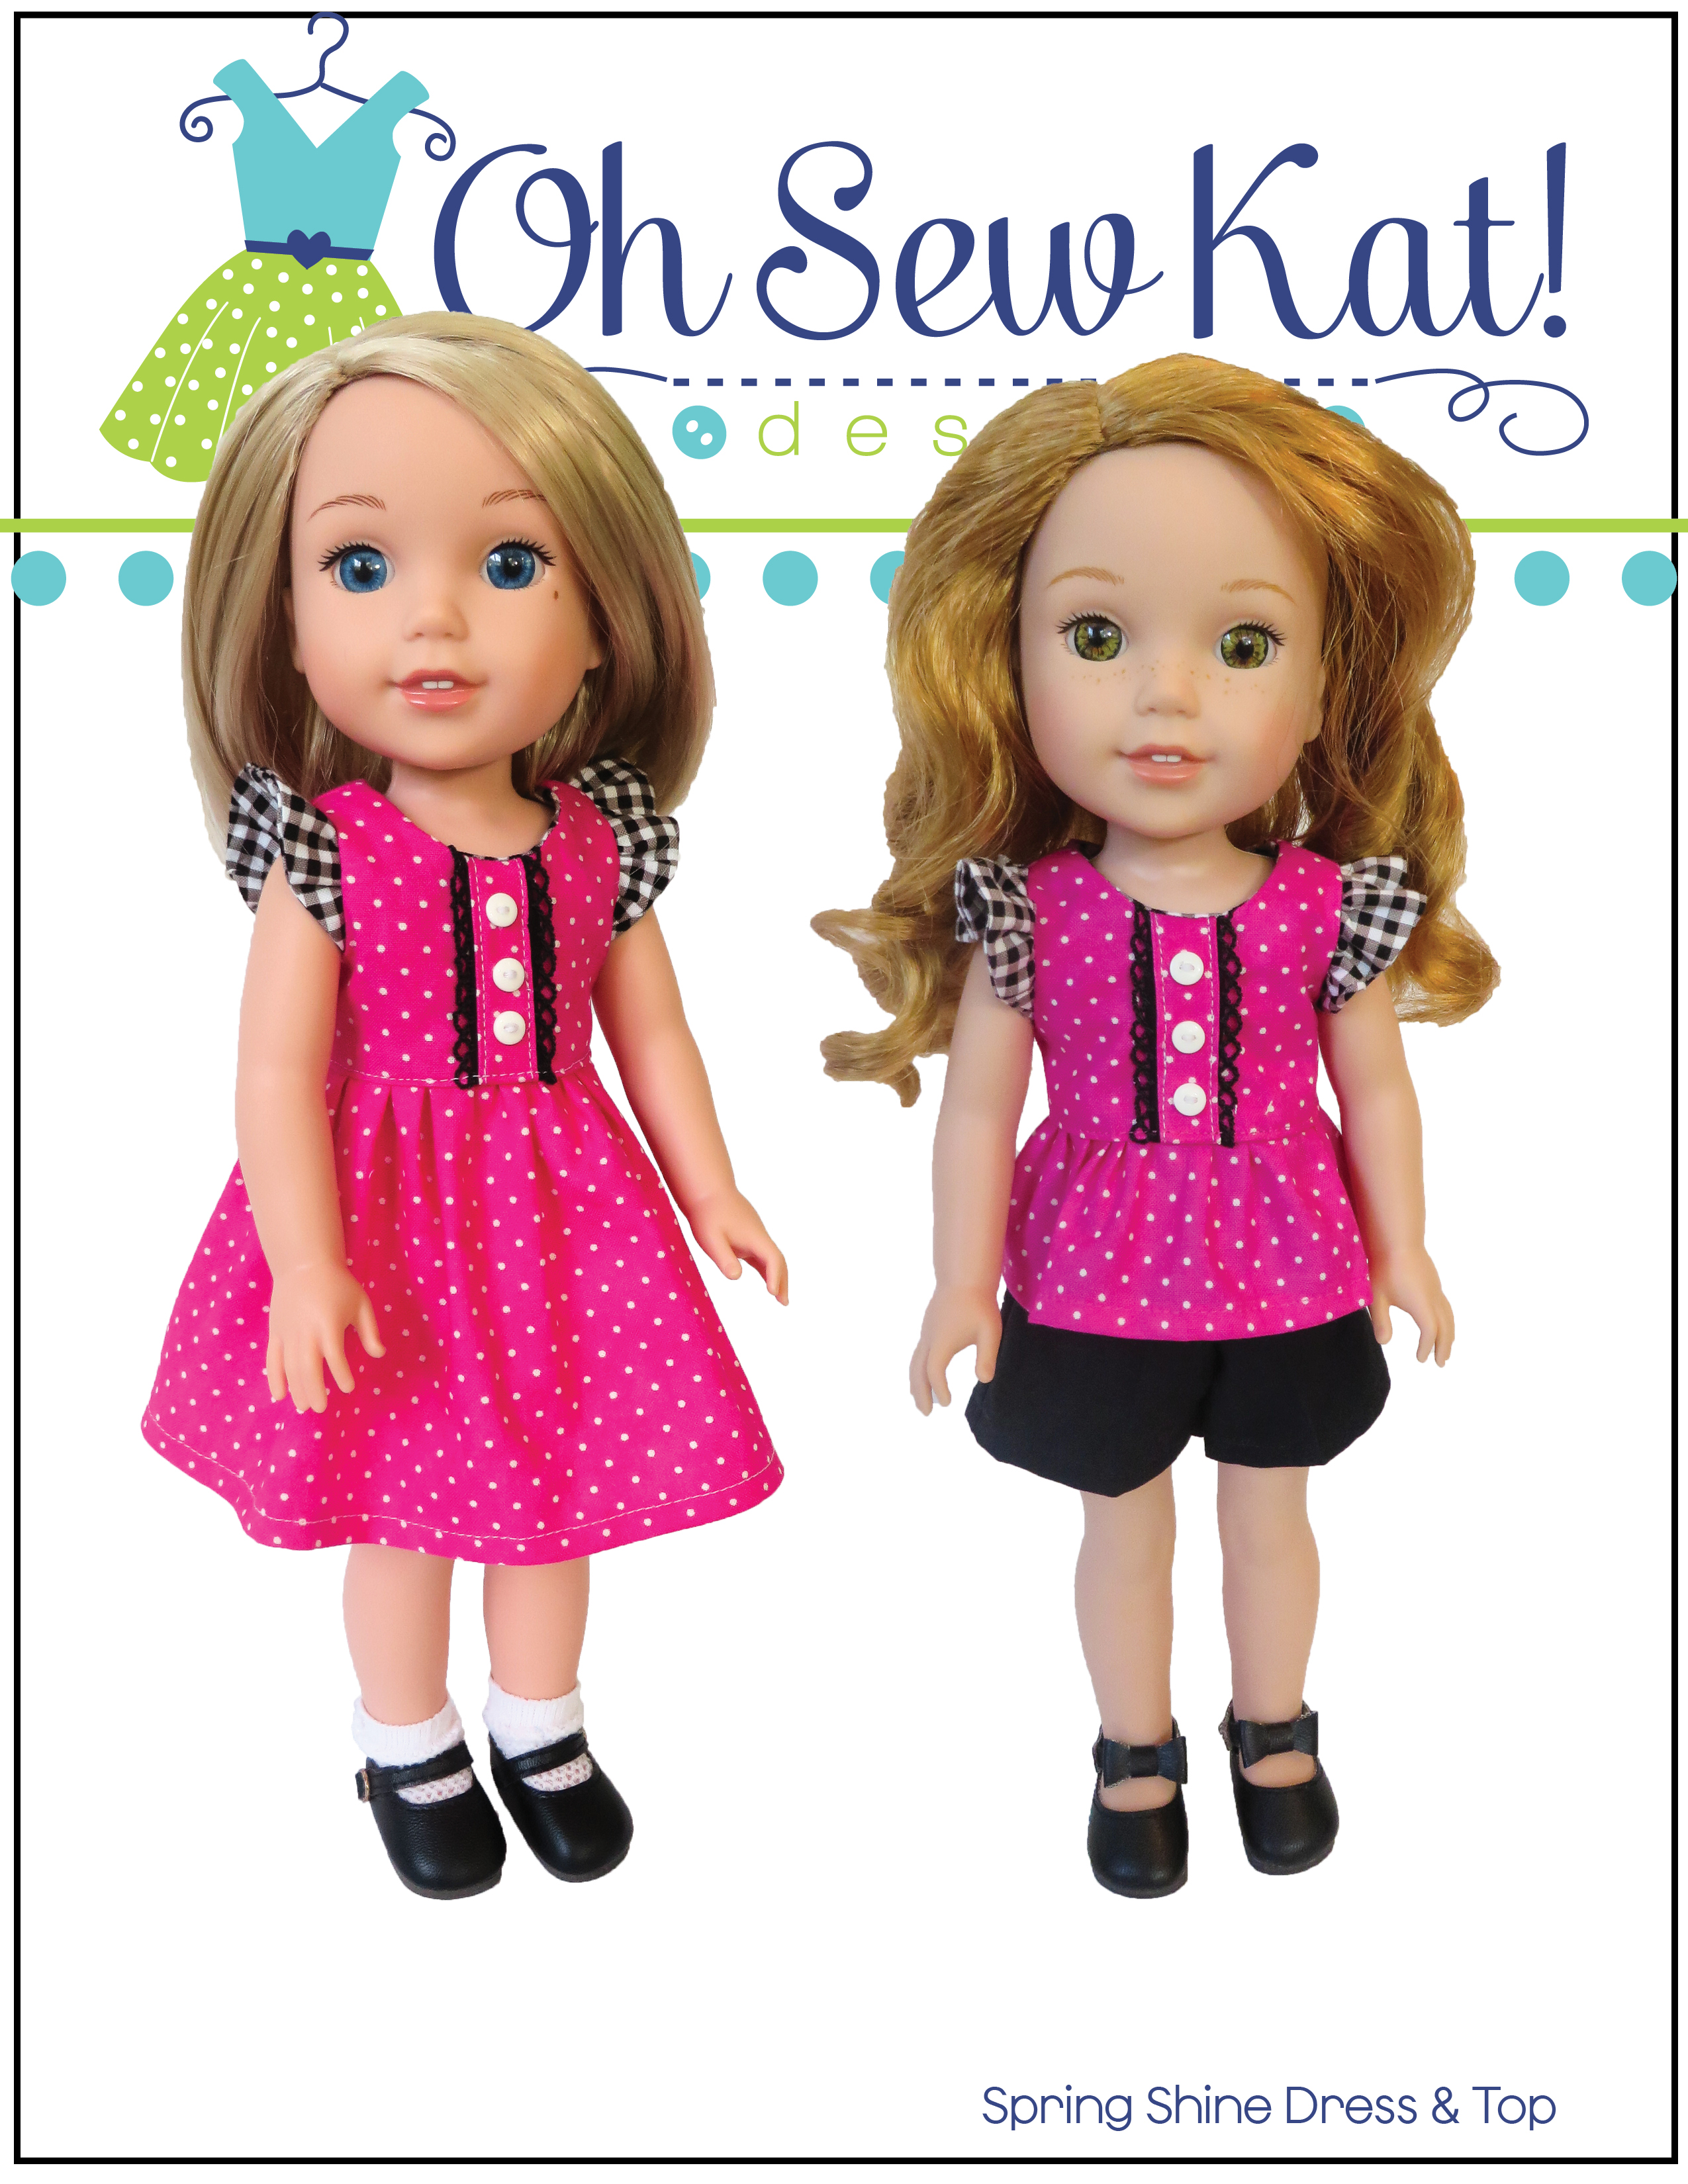 Wellie Wishers sewing pattern to make a dress or top with placket and flutter sleeves. Easy beginner level sewing patterns to diy your own doll clothes for 14 and 18 inch dolls by Oh Sew Kat! #welliewishers #dollclothes #sewingpattern